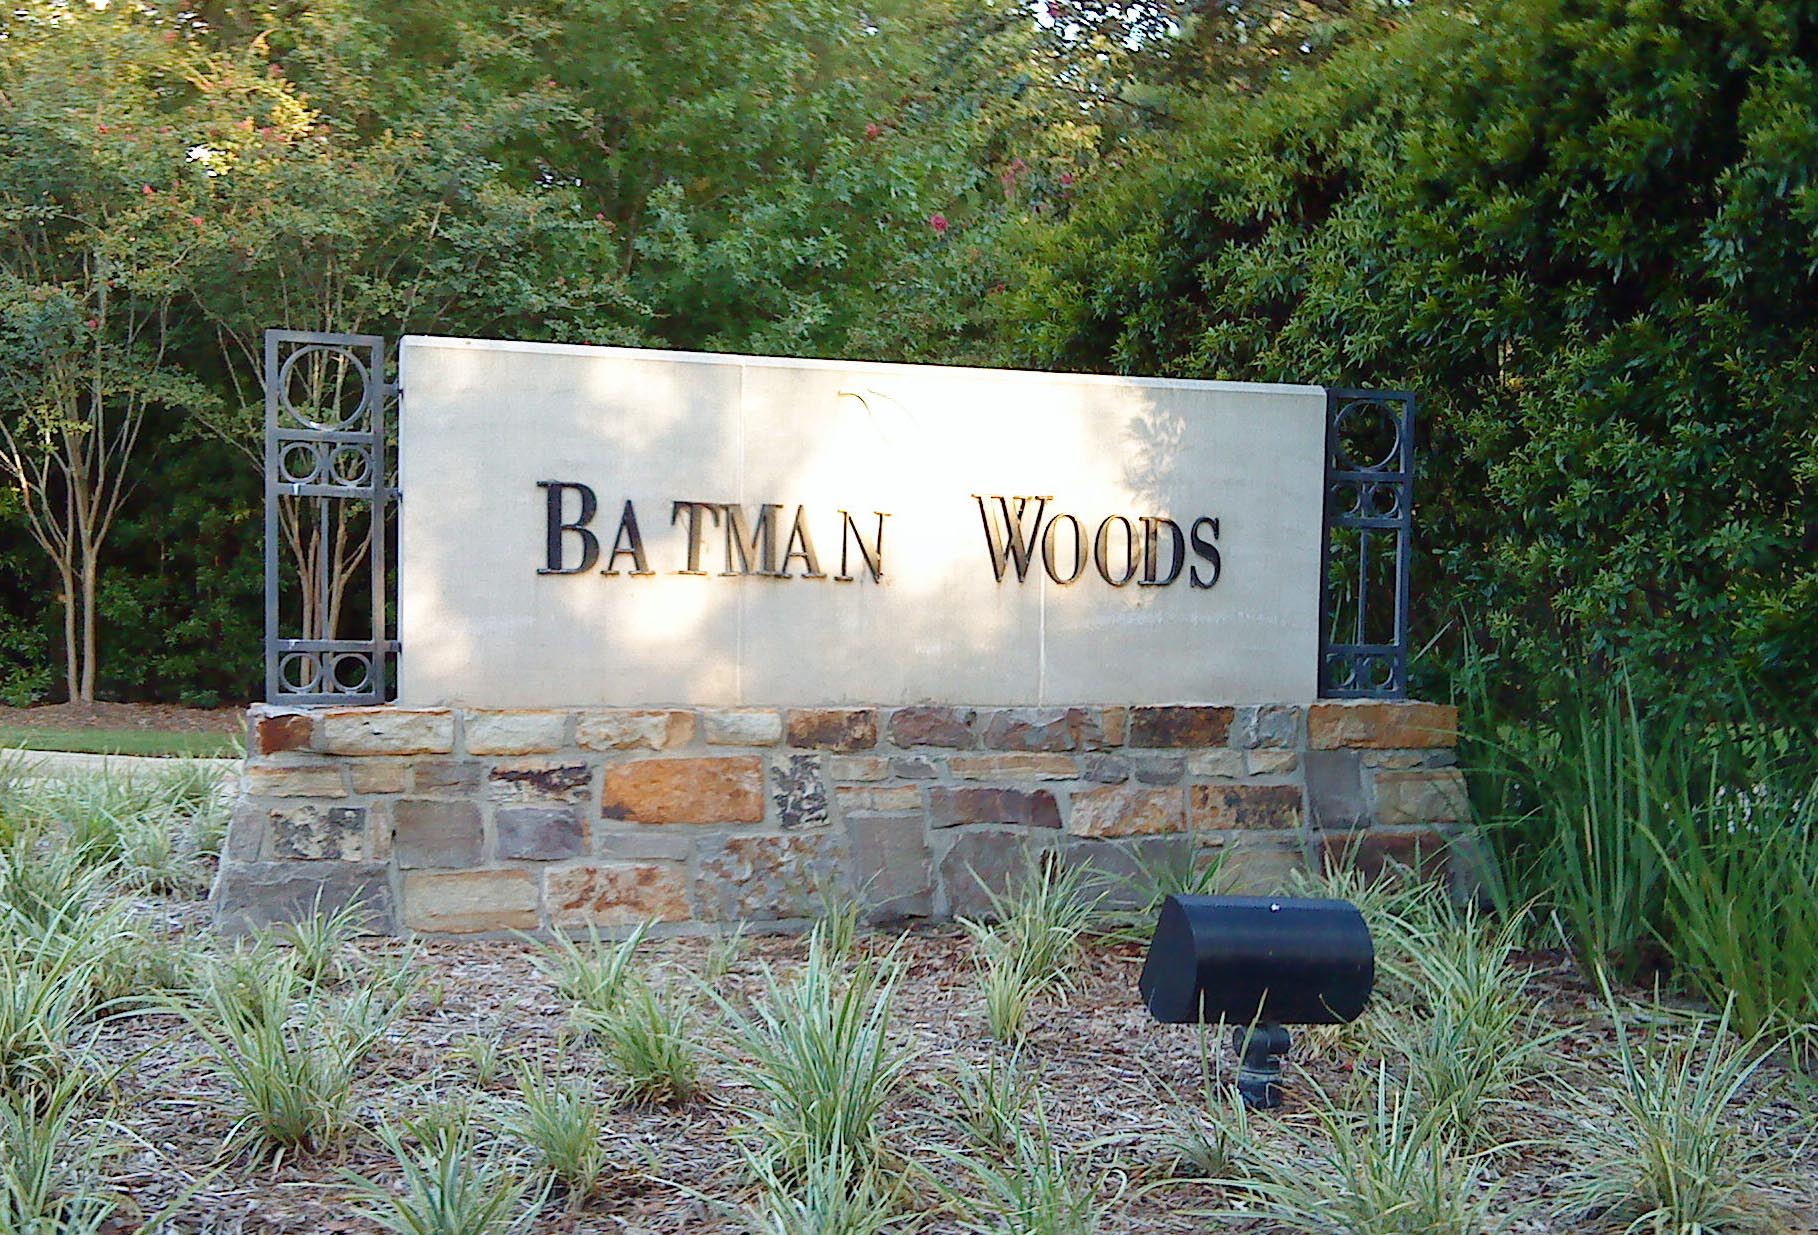 This is the sign in for my neighborhood. Its supposed to say Bantam Woods, but somebody changed it to Batman Woods.